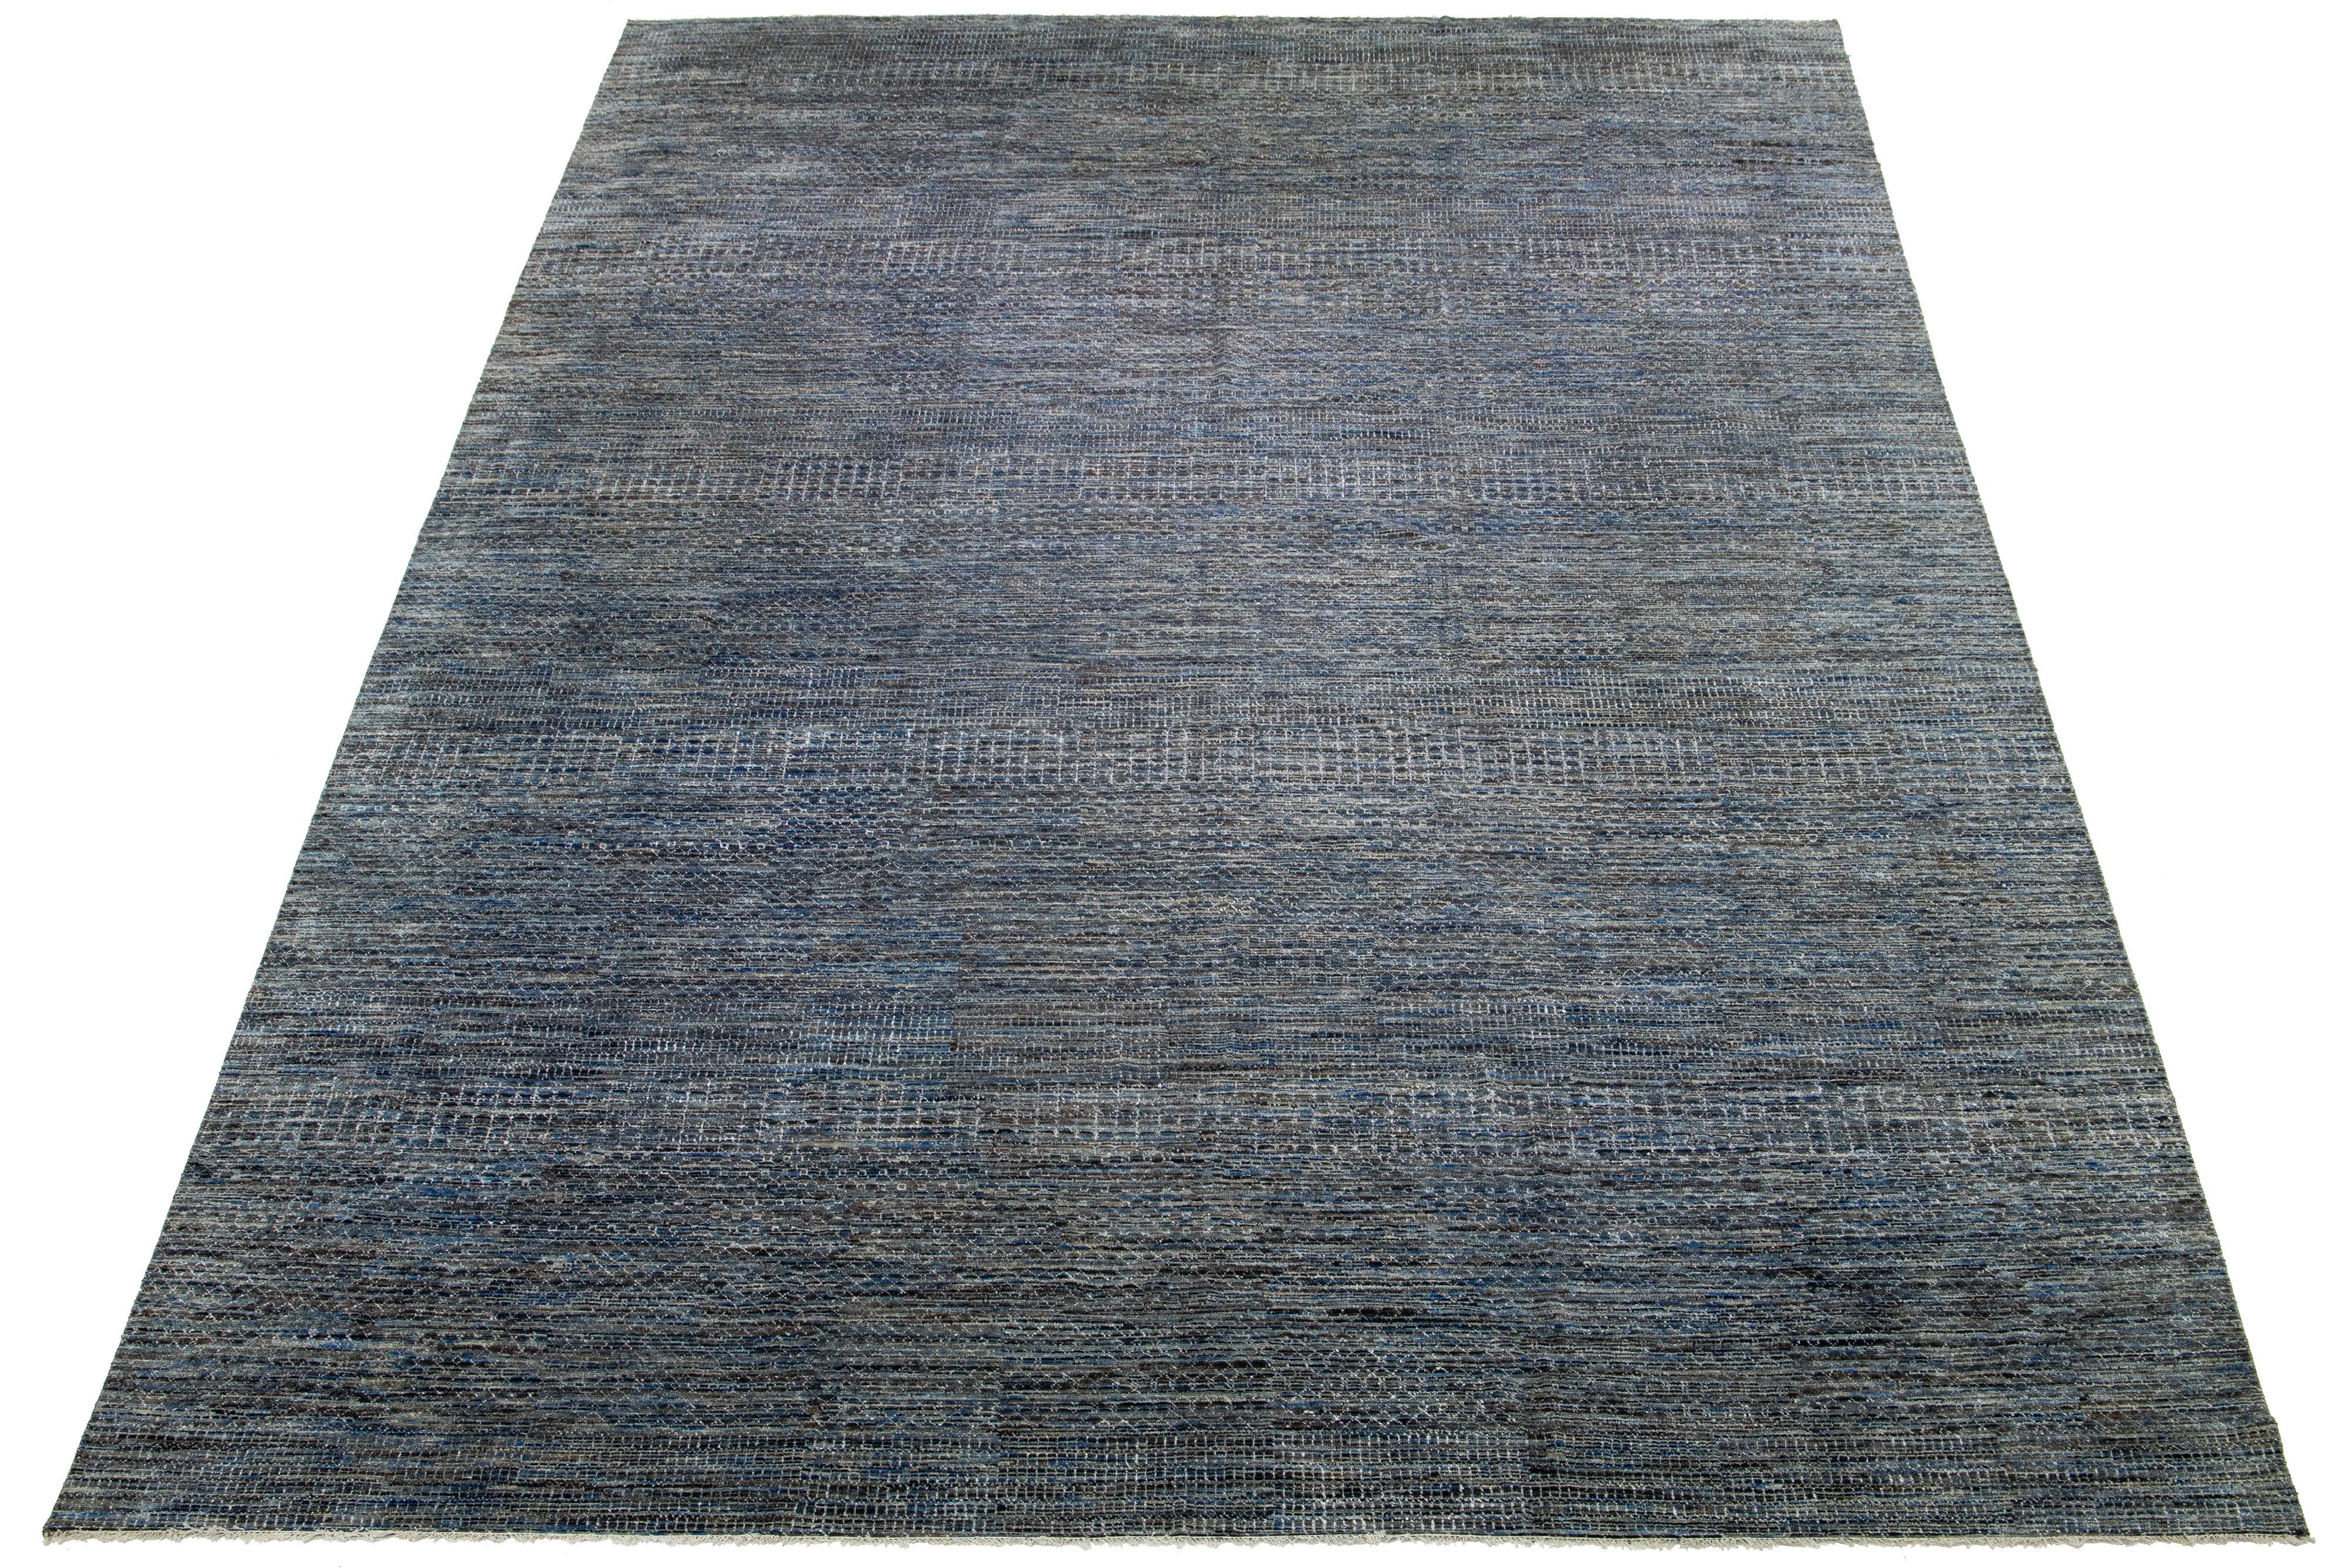 This beautiful hand-knotted Savannah wool rug features a stunning contemporary design, showcasing a meticulously crafted gray field with intricate geometric patterns in blue, ivory, and brown accents.

This rug measures 16'3